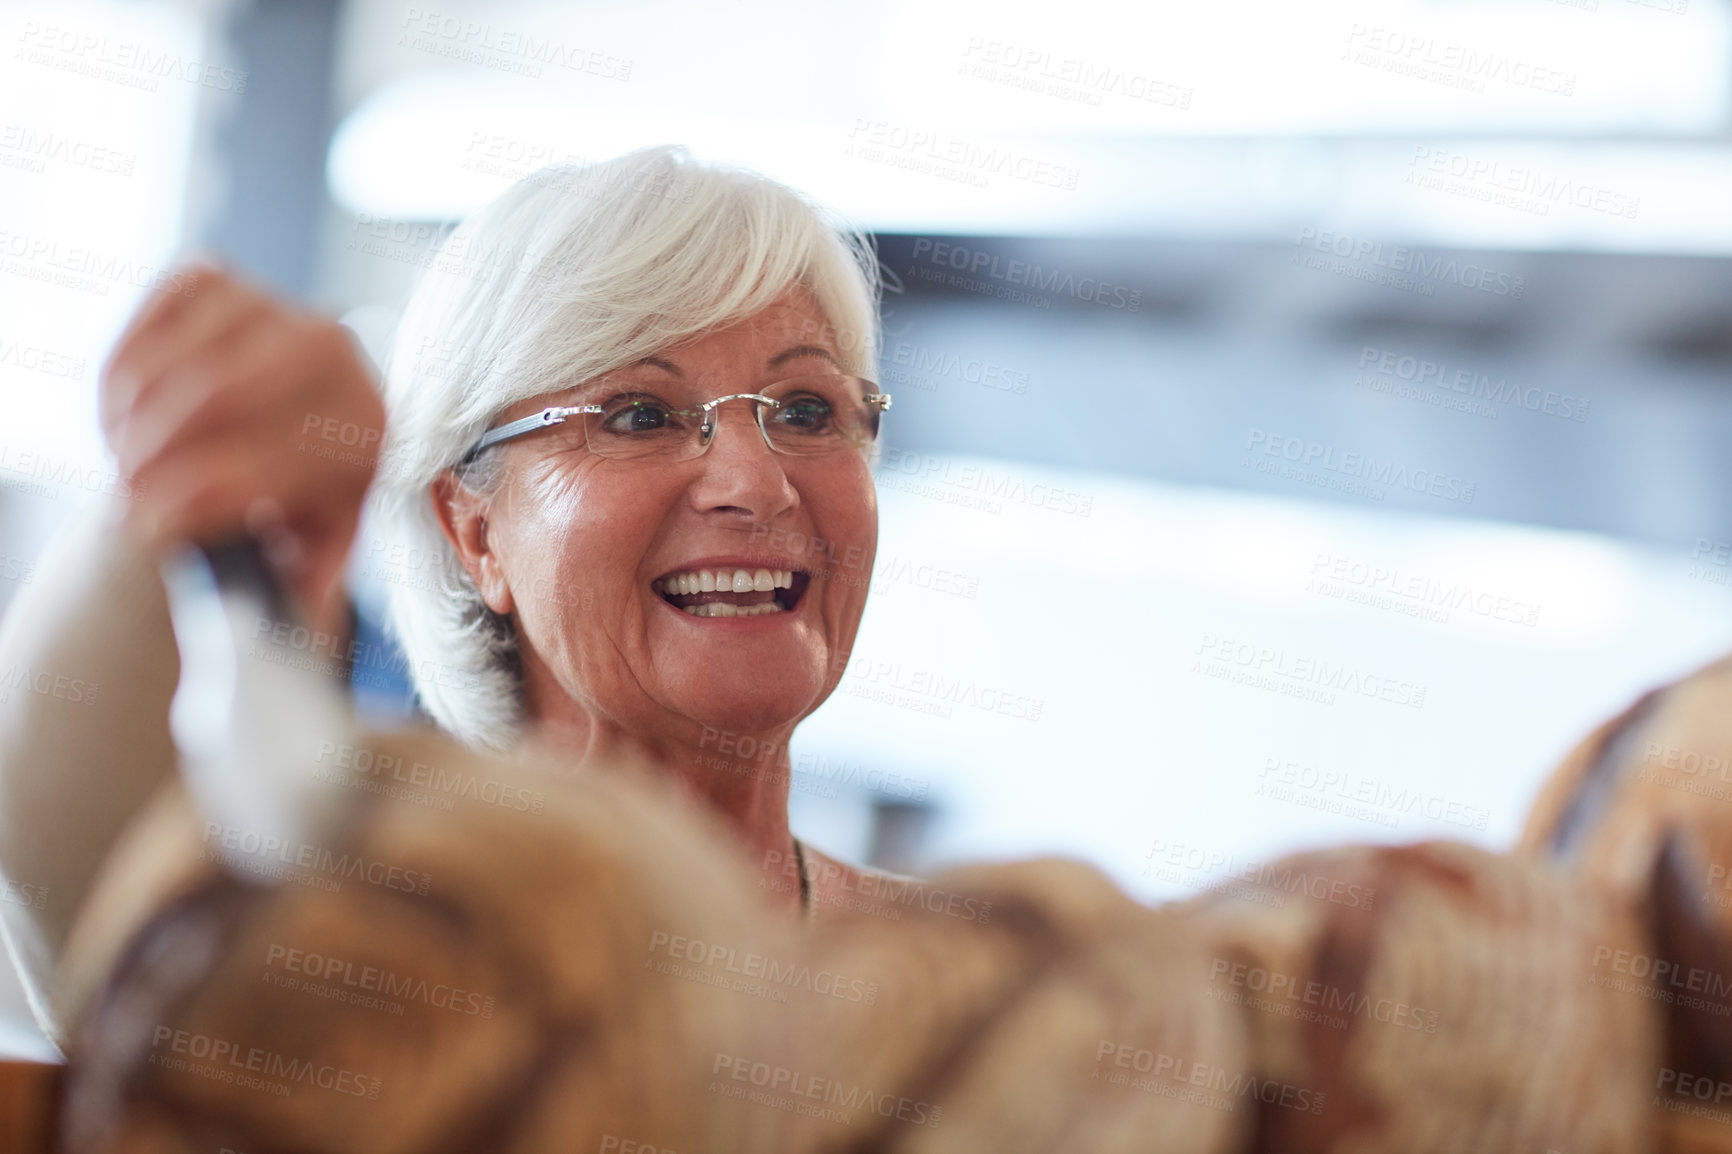 Buy stock photo Shot of a happy senior woman working in a bakery